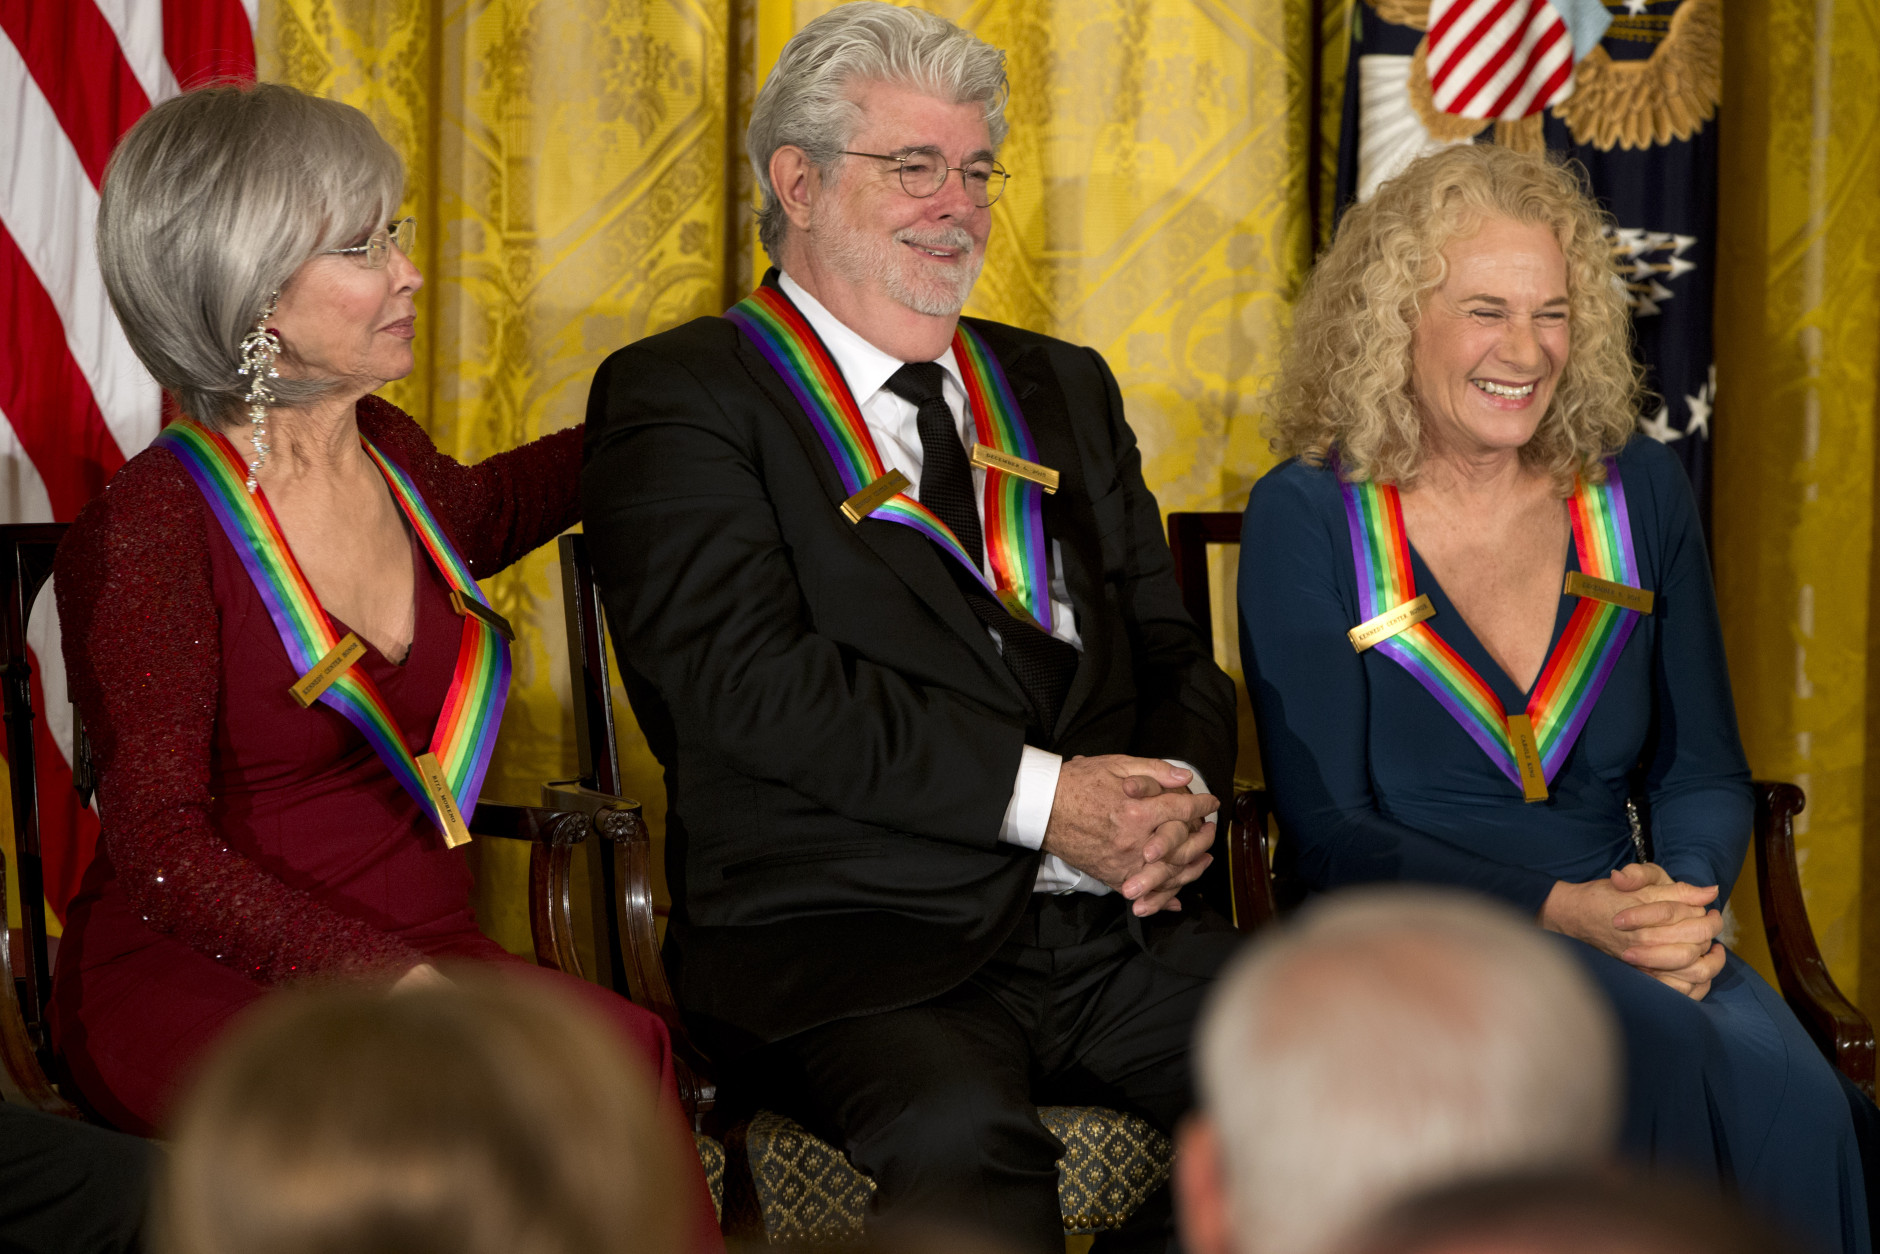 2015 Kennedy Center Honors honorees from left, actress and singer Rita Moreno, filmmaker George Lucas, and singer-songwriter Carole King, react as President Barack Obama speaks about Lucas during the 2015 Kennedy Center Honors reception in the East Room of the White House in Washington, Sunday, Dec. 6, 2015. (AP Photo/Jacquelyn Martin)